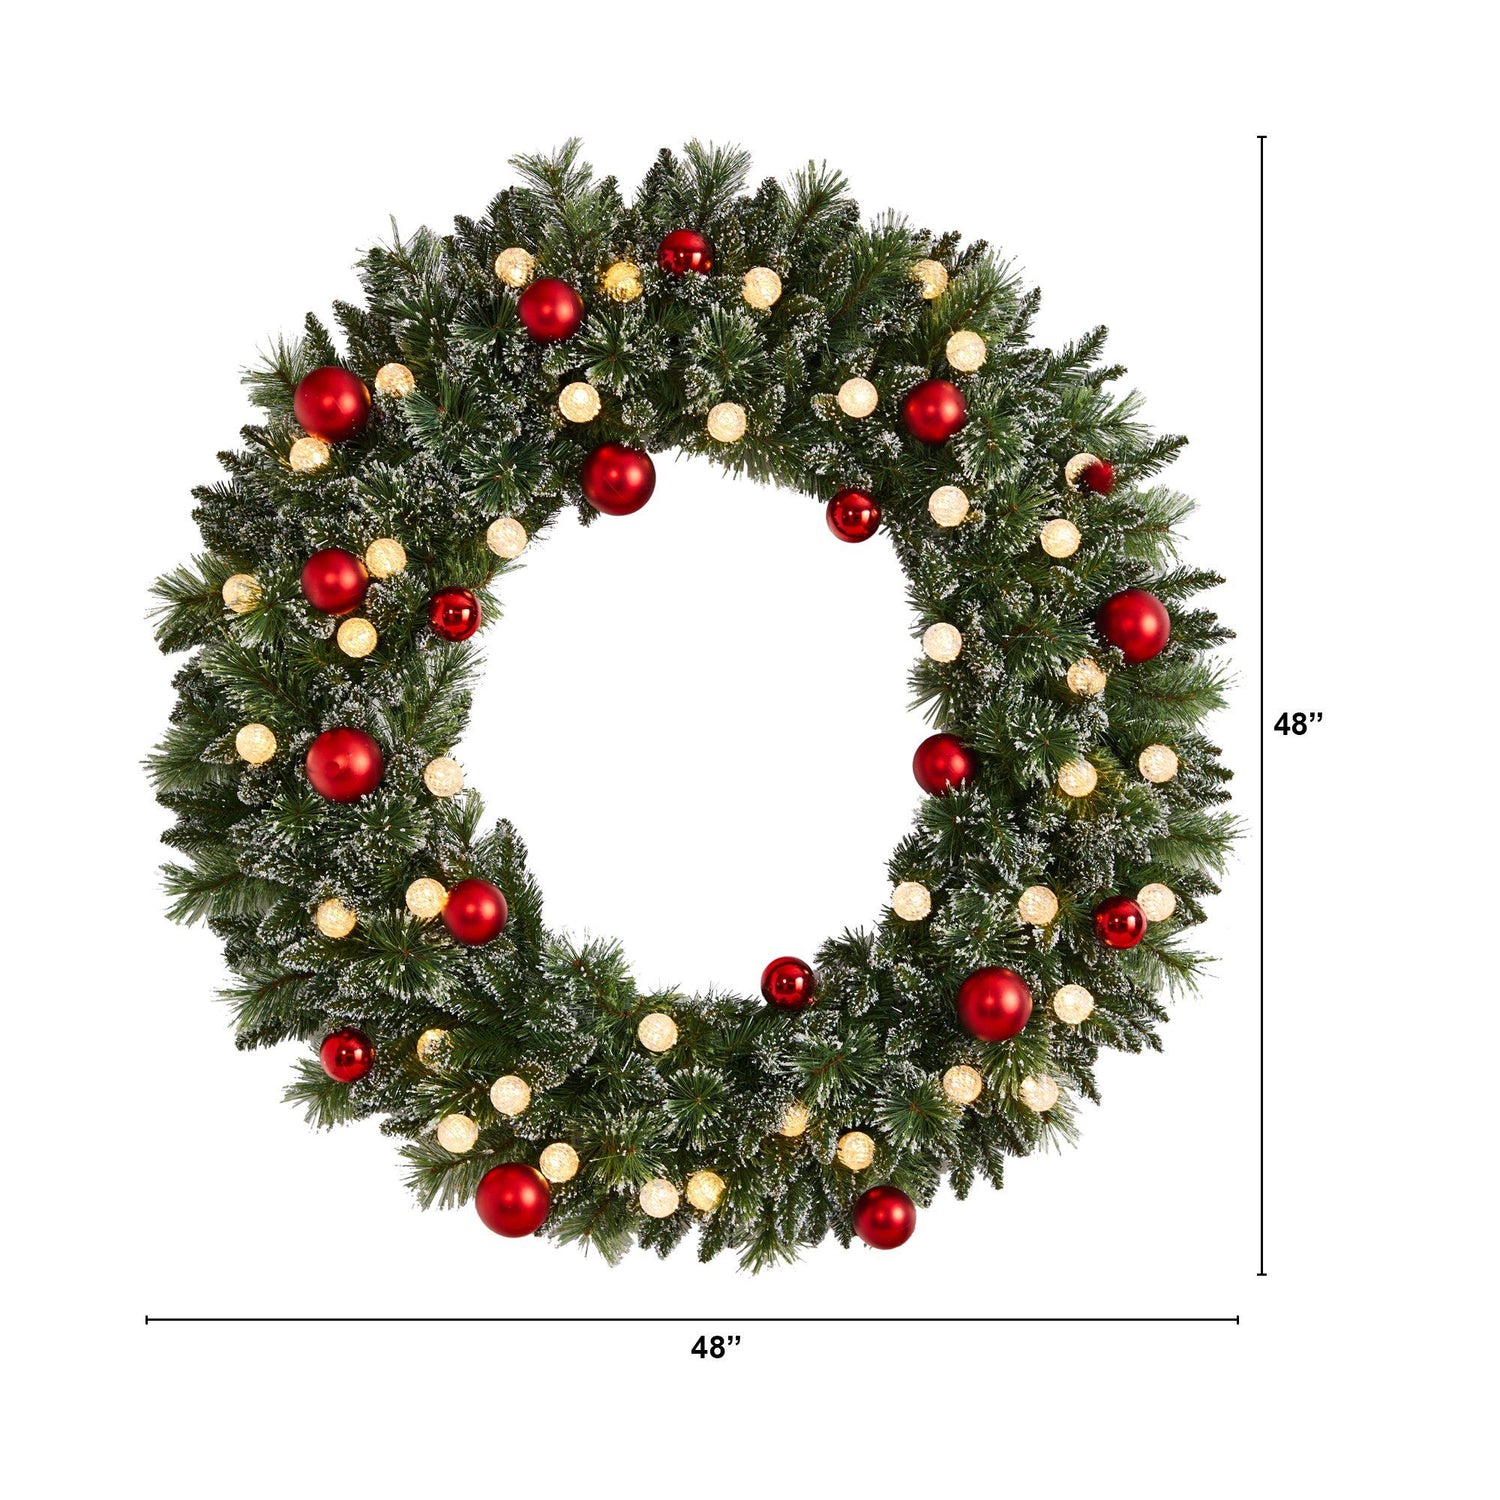 4' Oversized Pre-Lit Frosted Holiday Christmas Wreath with Ornaments and 40 LED Globe Lights